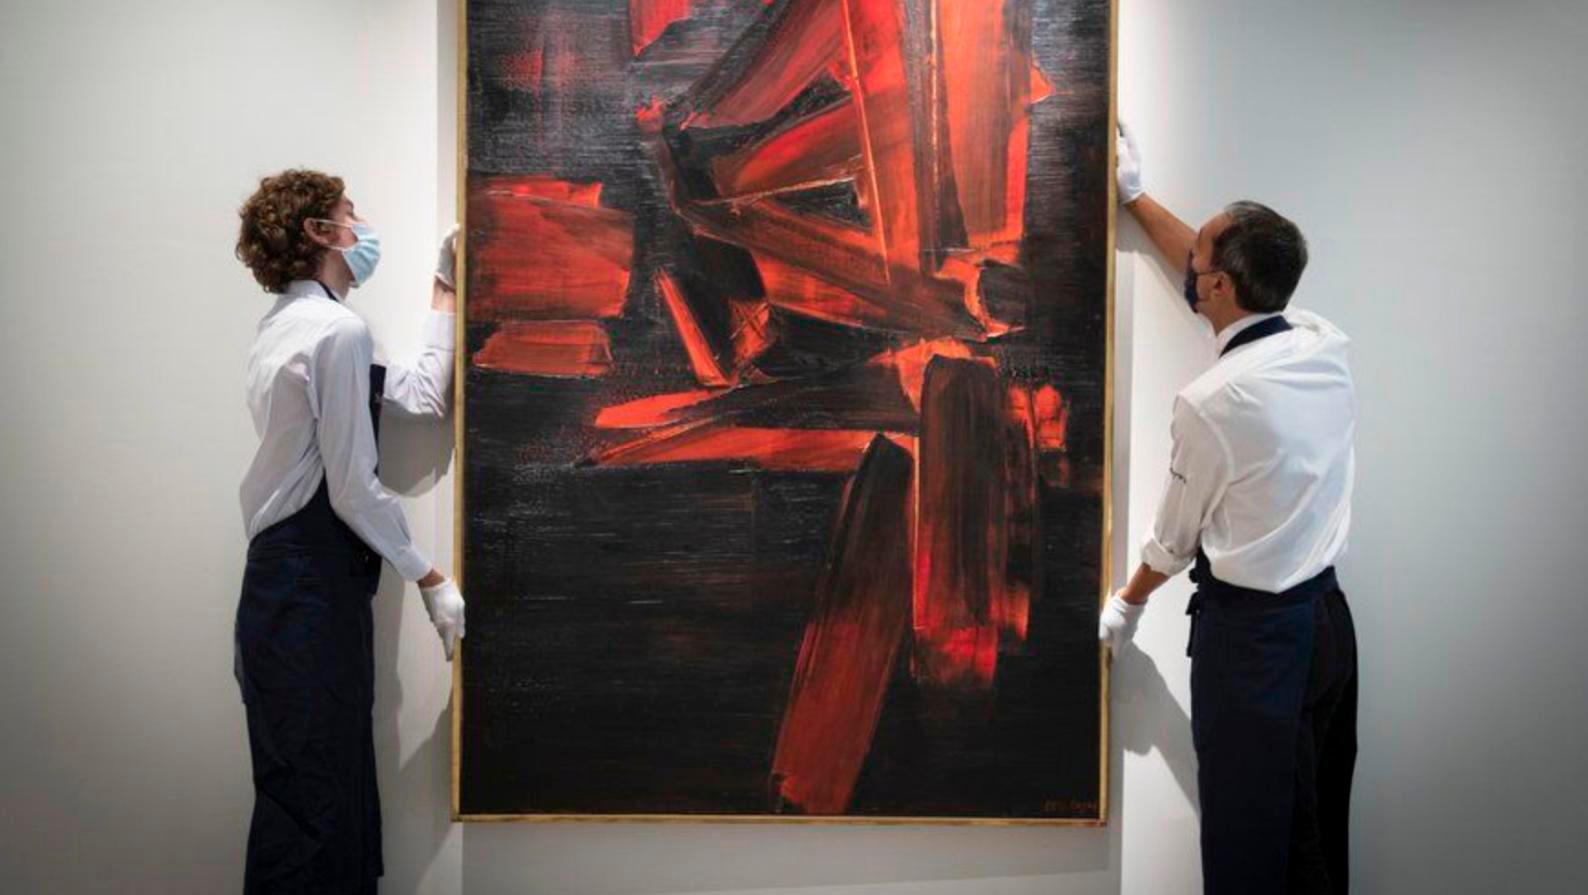 Painting 195 x 130 cm, August 4, 1961 by Pierre Soulages sold for $20.14 million... Art Market Overview: Pierre Soulages, a Master of the Market